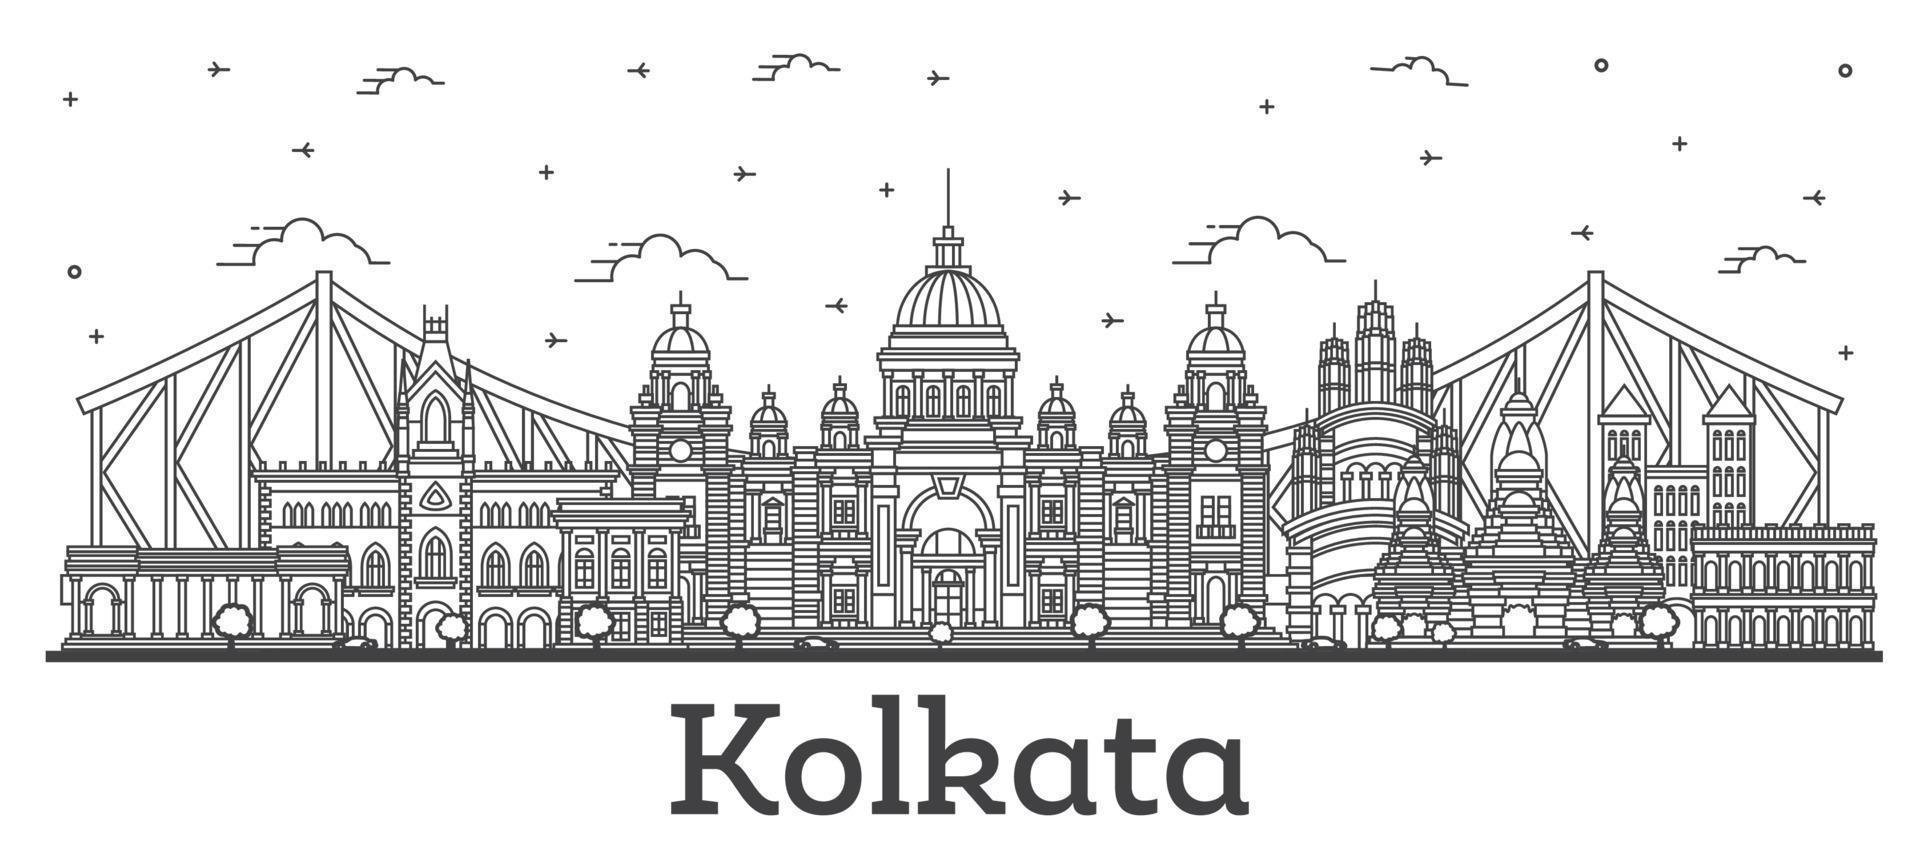 Outline Kolkata India City Skyline with Historic Buildings Isolated on White. vector